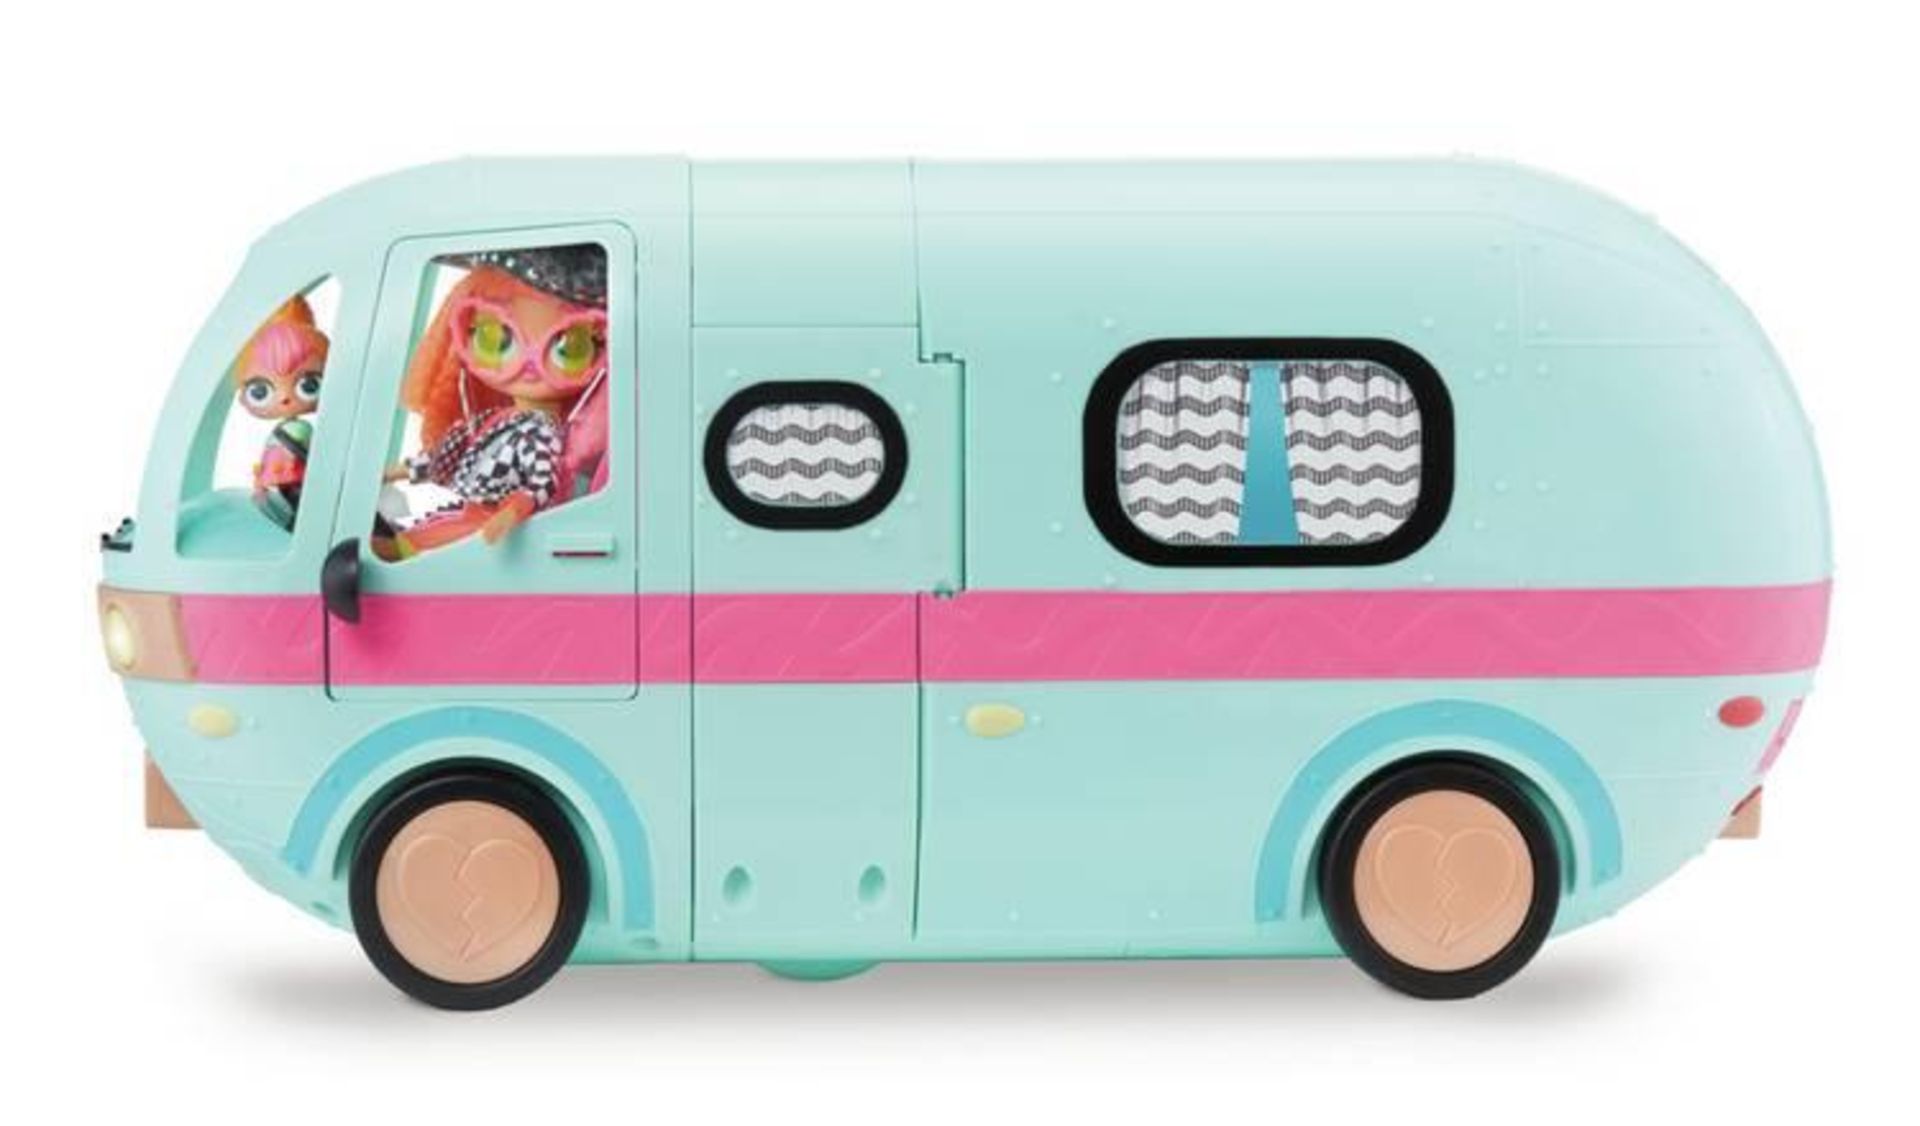 Lol Surprise 2-in-1 Glamper Fashion Camper with 55 Surprises 919/7251 £100.00 RRP